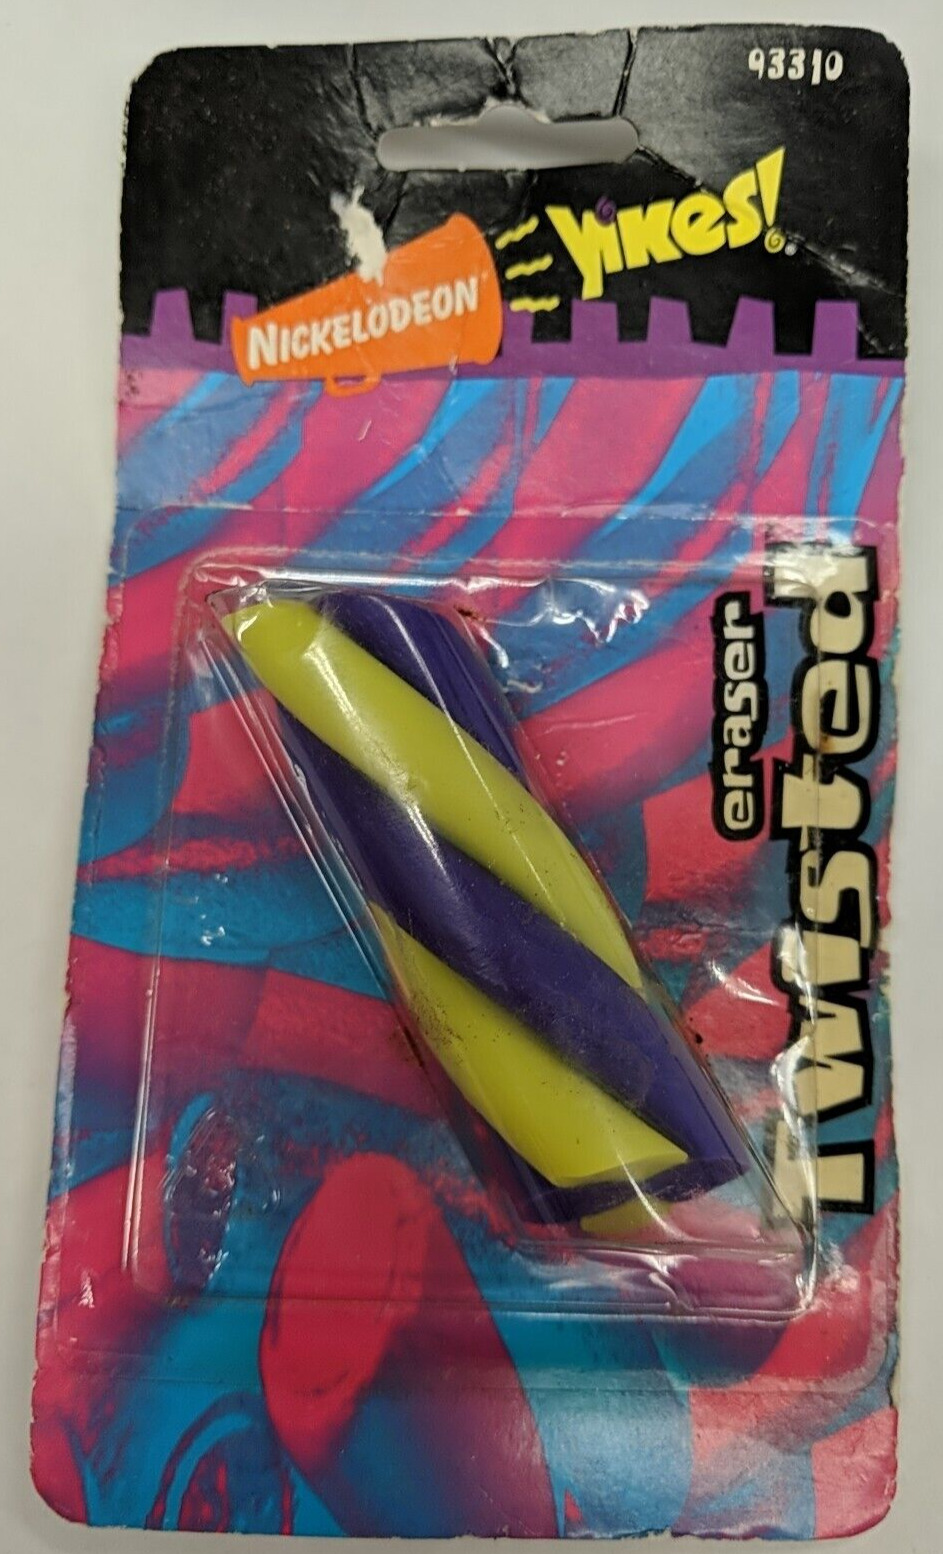 Nickelodeon YIKES Twisted Erasers Sanford 93310 Purple & Yellow NOS Open Package